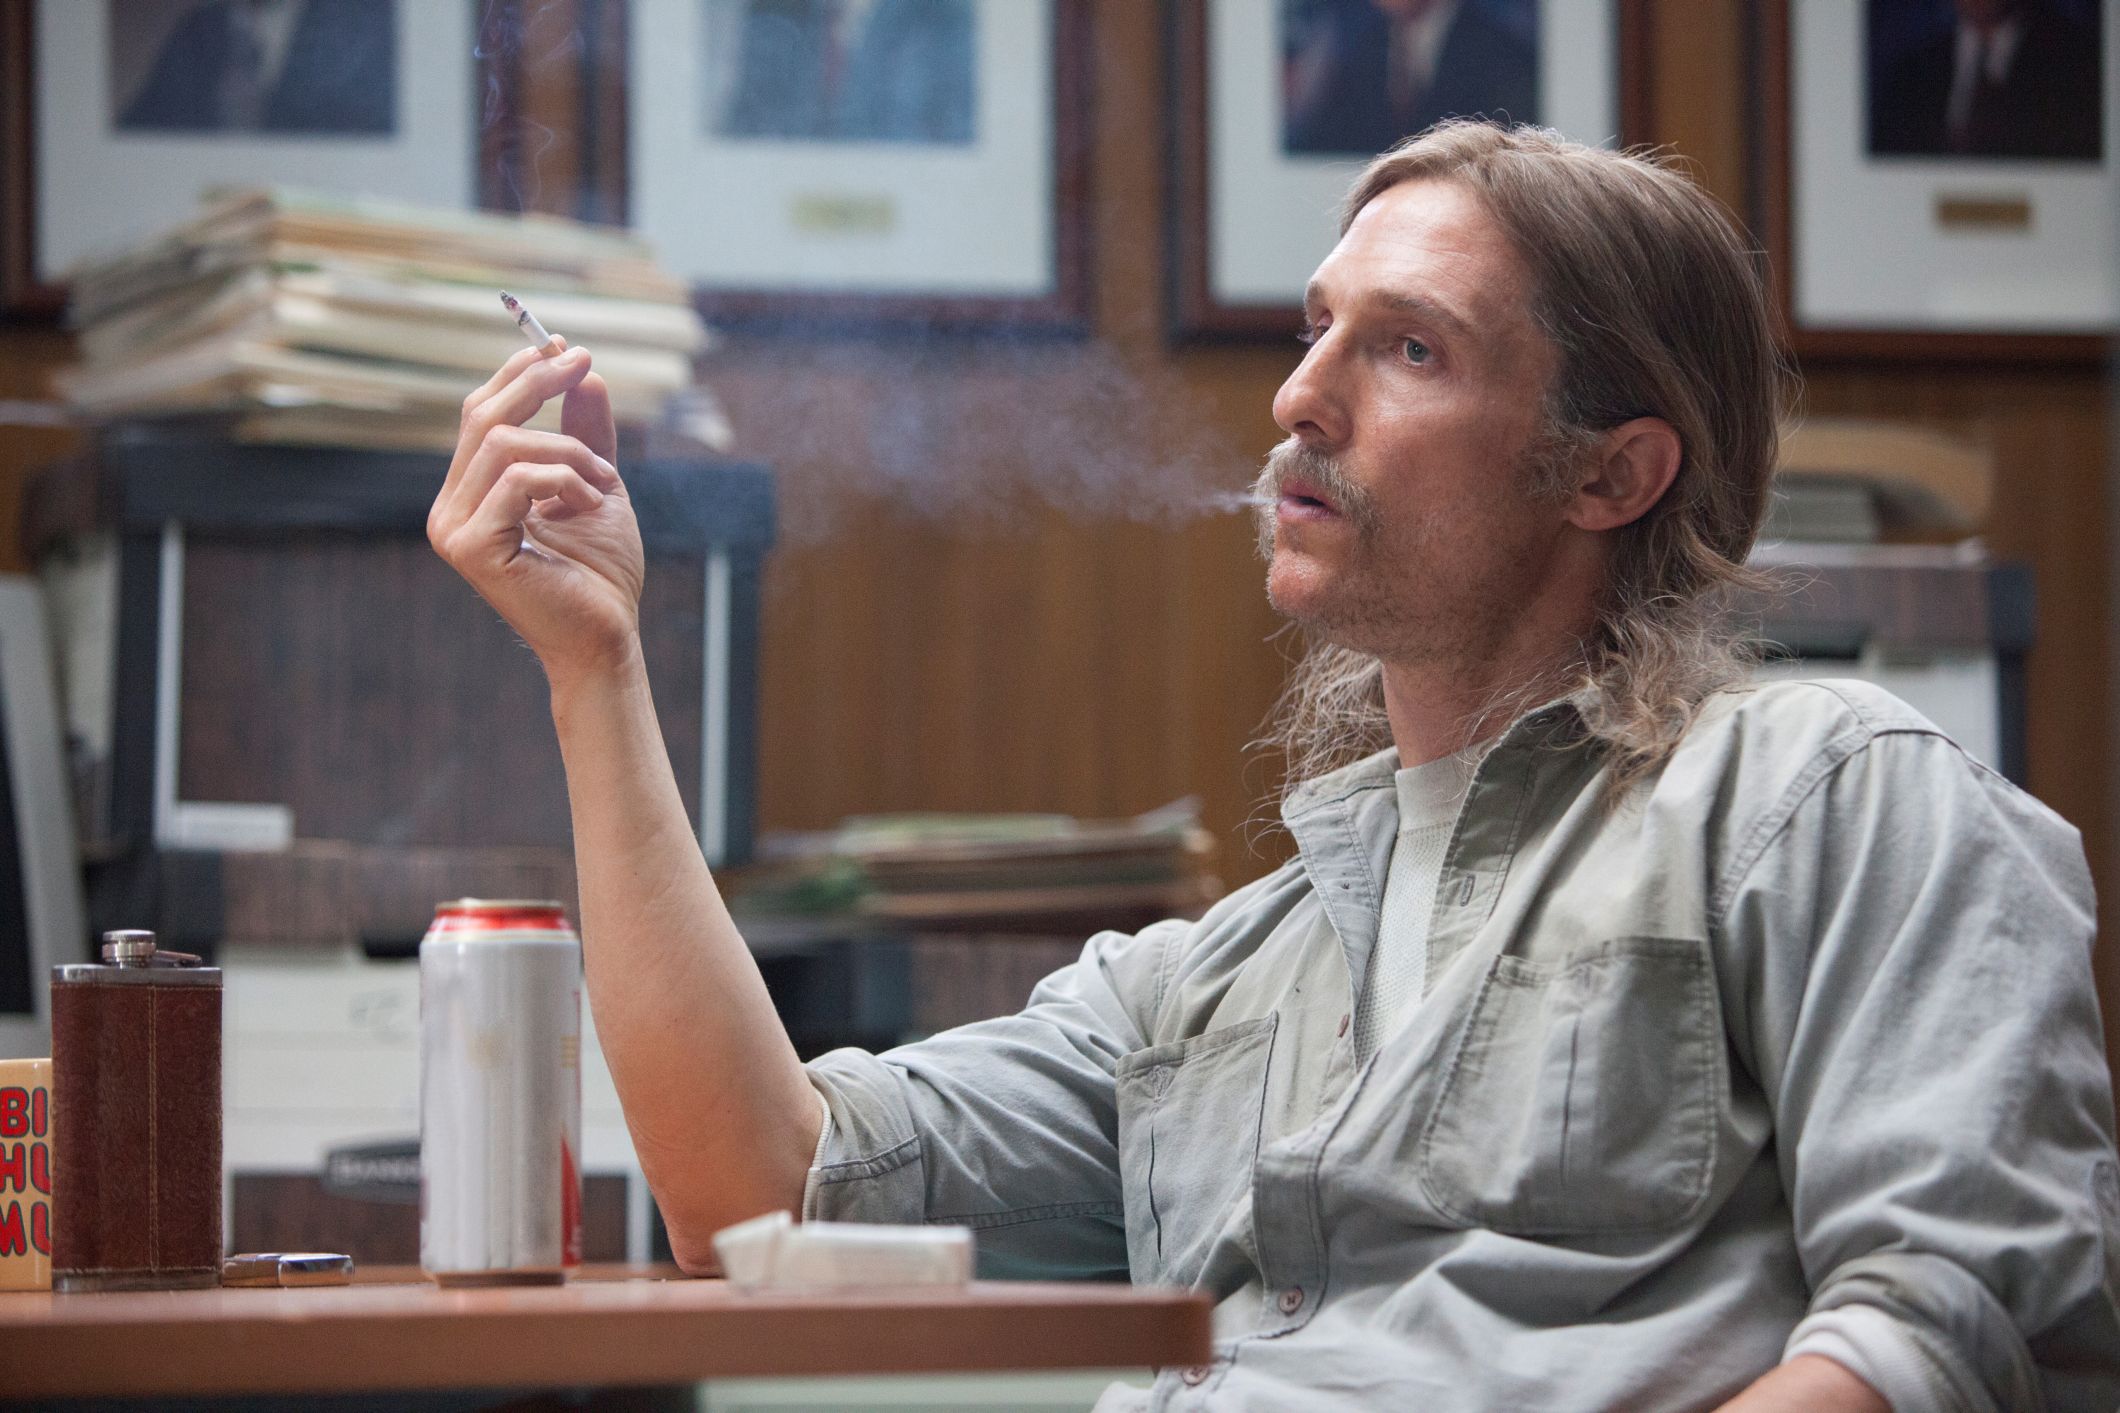 Rust and cohle фото 78